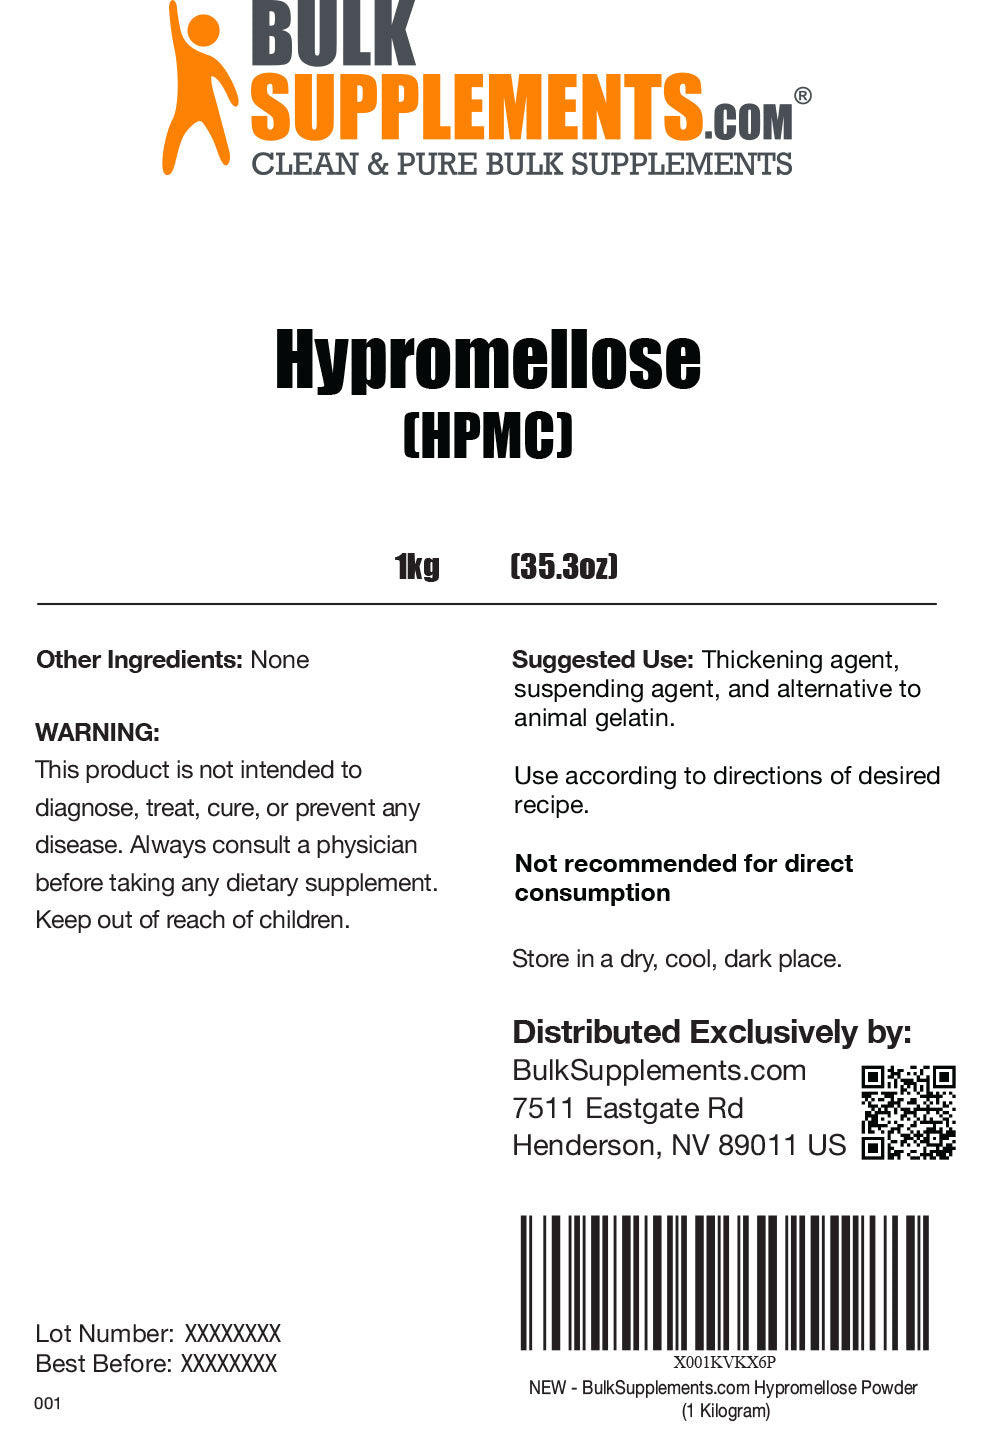 Suggested Use Hypromellose (HPMC)